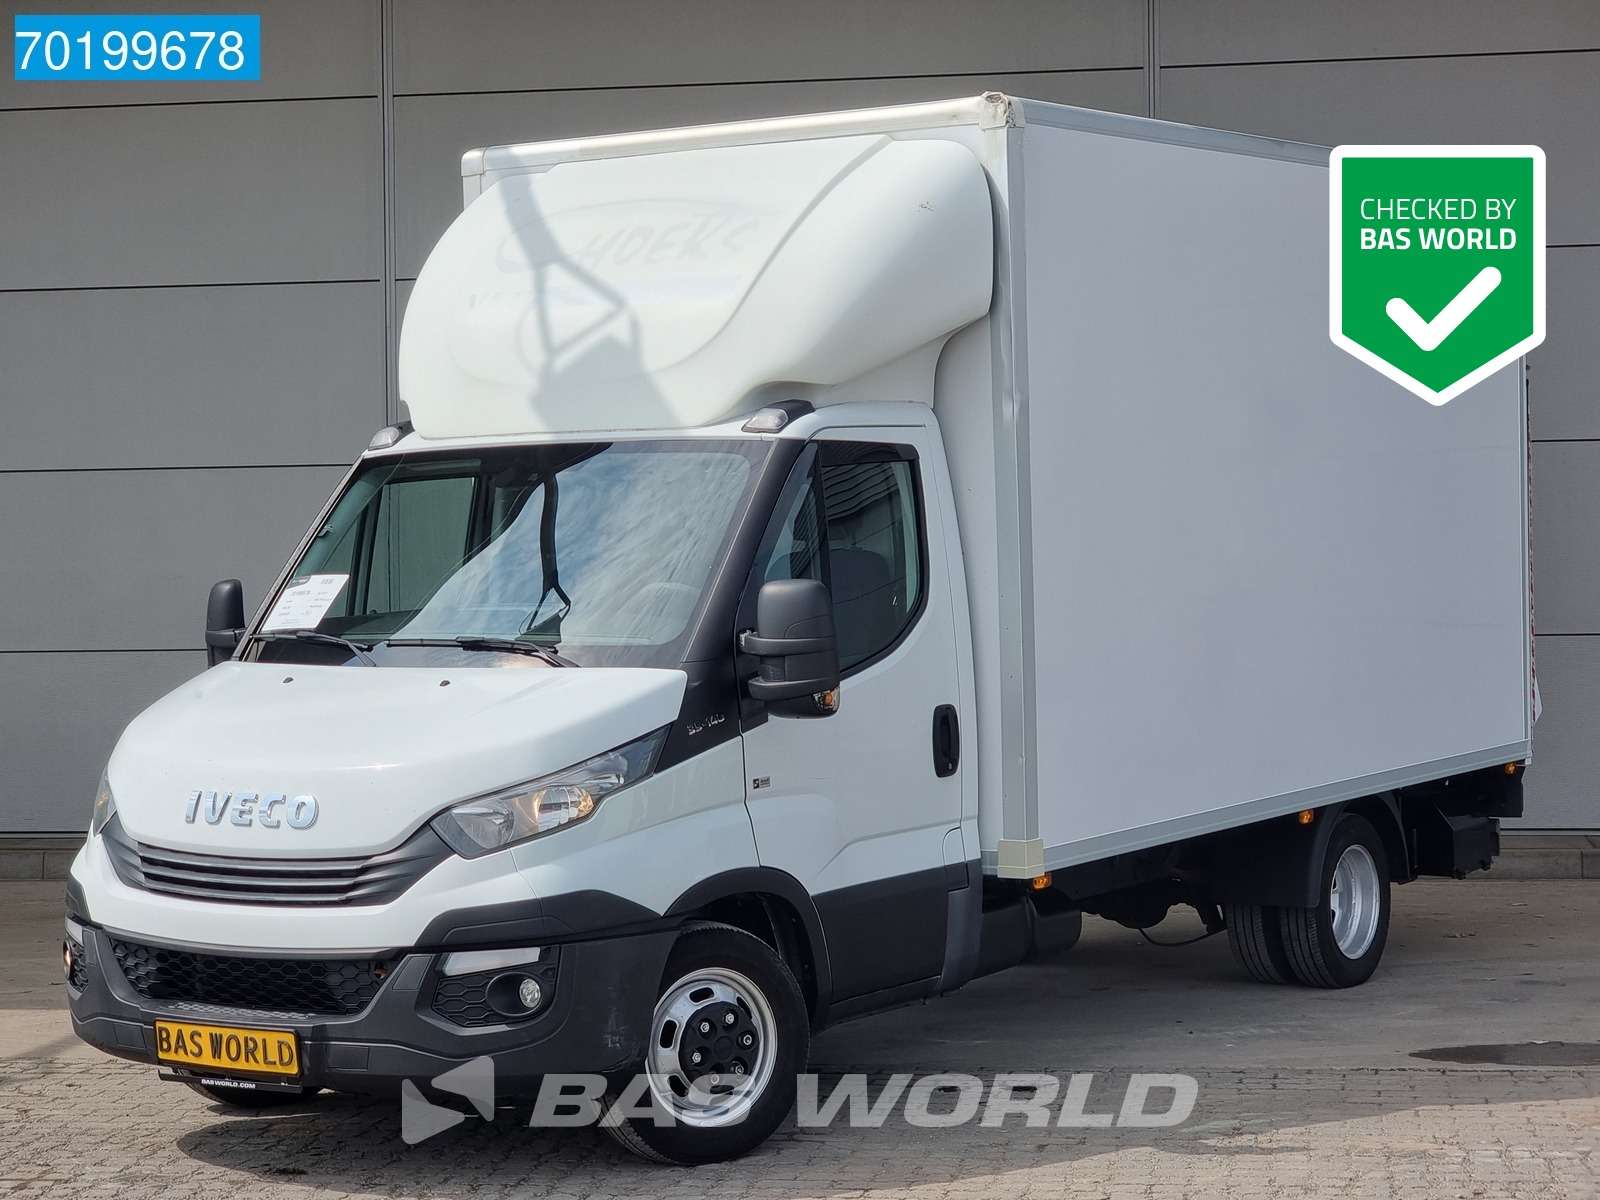 Iveco Daily Transporter in White used in VEGHEL for € 29,948.-